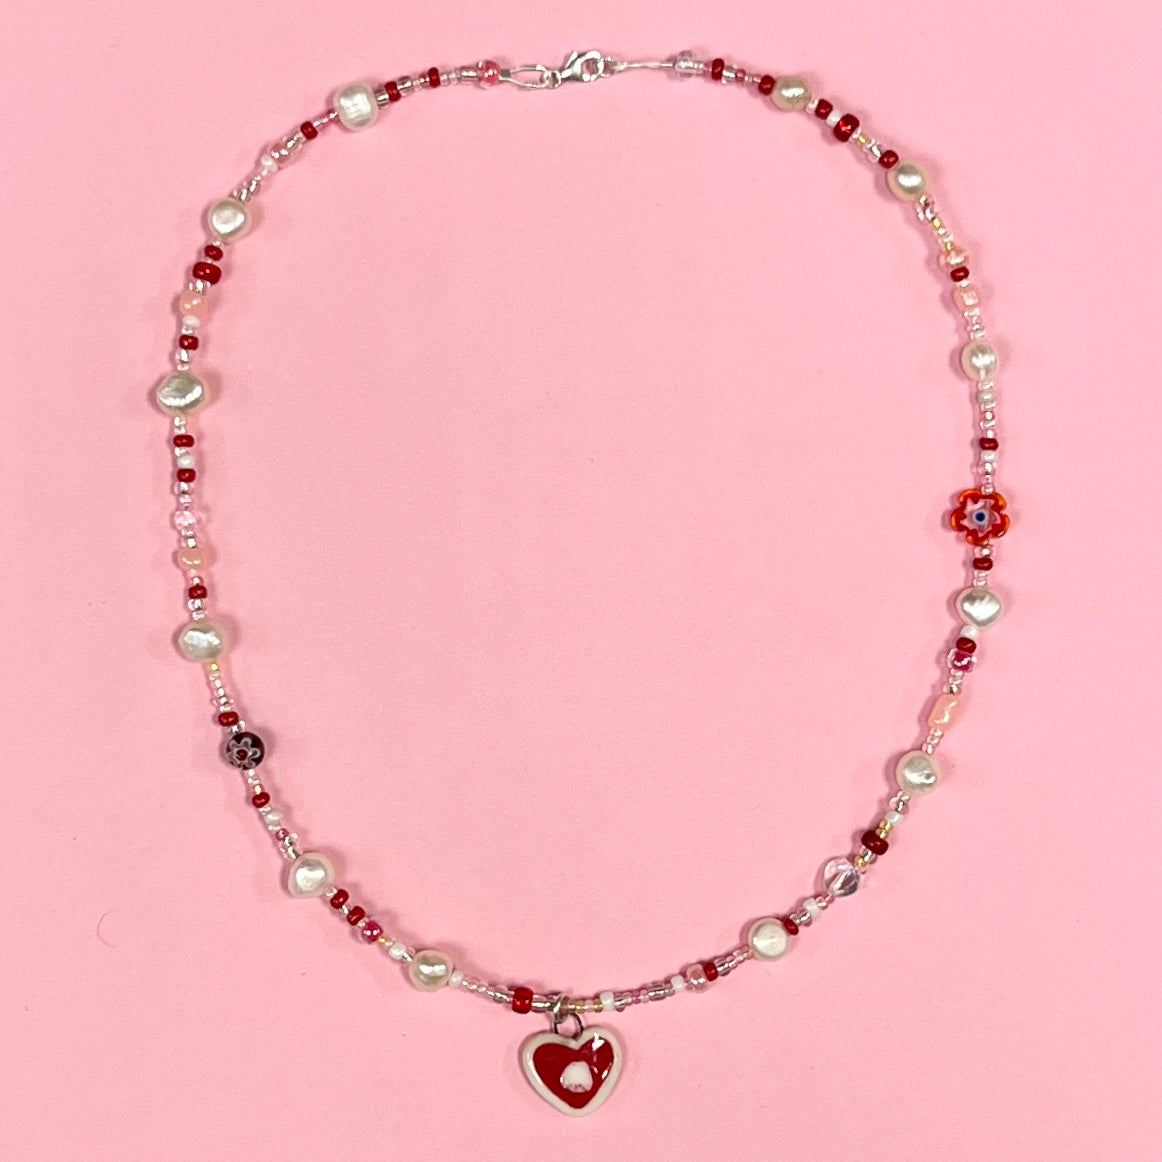 Puppy Red Heart Necklace